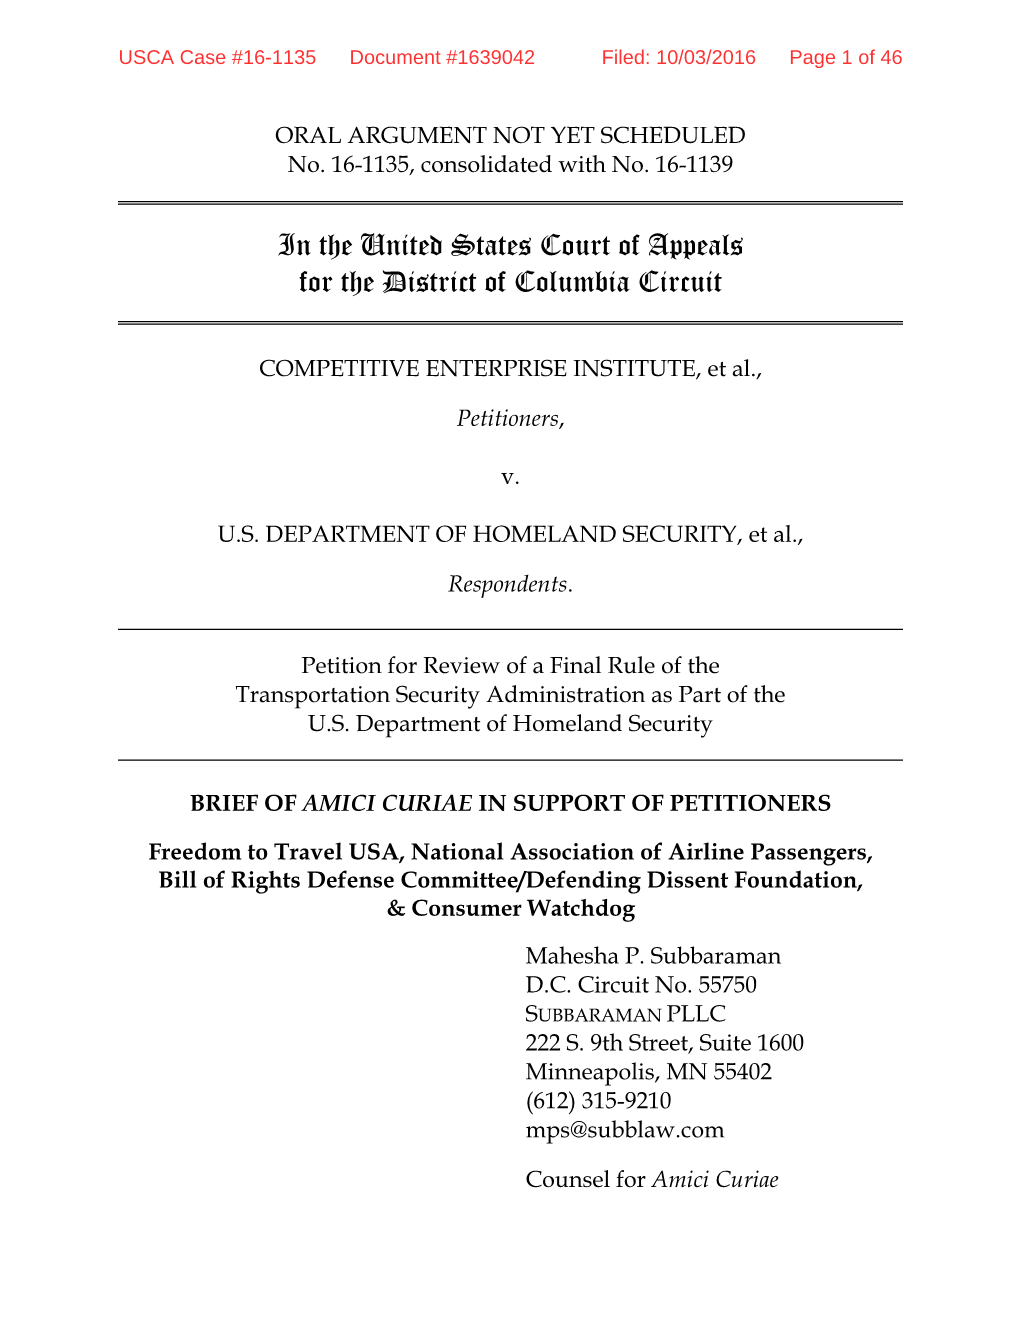 Freedom to Travel USA Amicus Brief